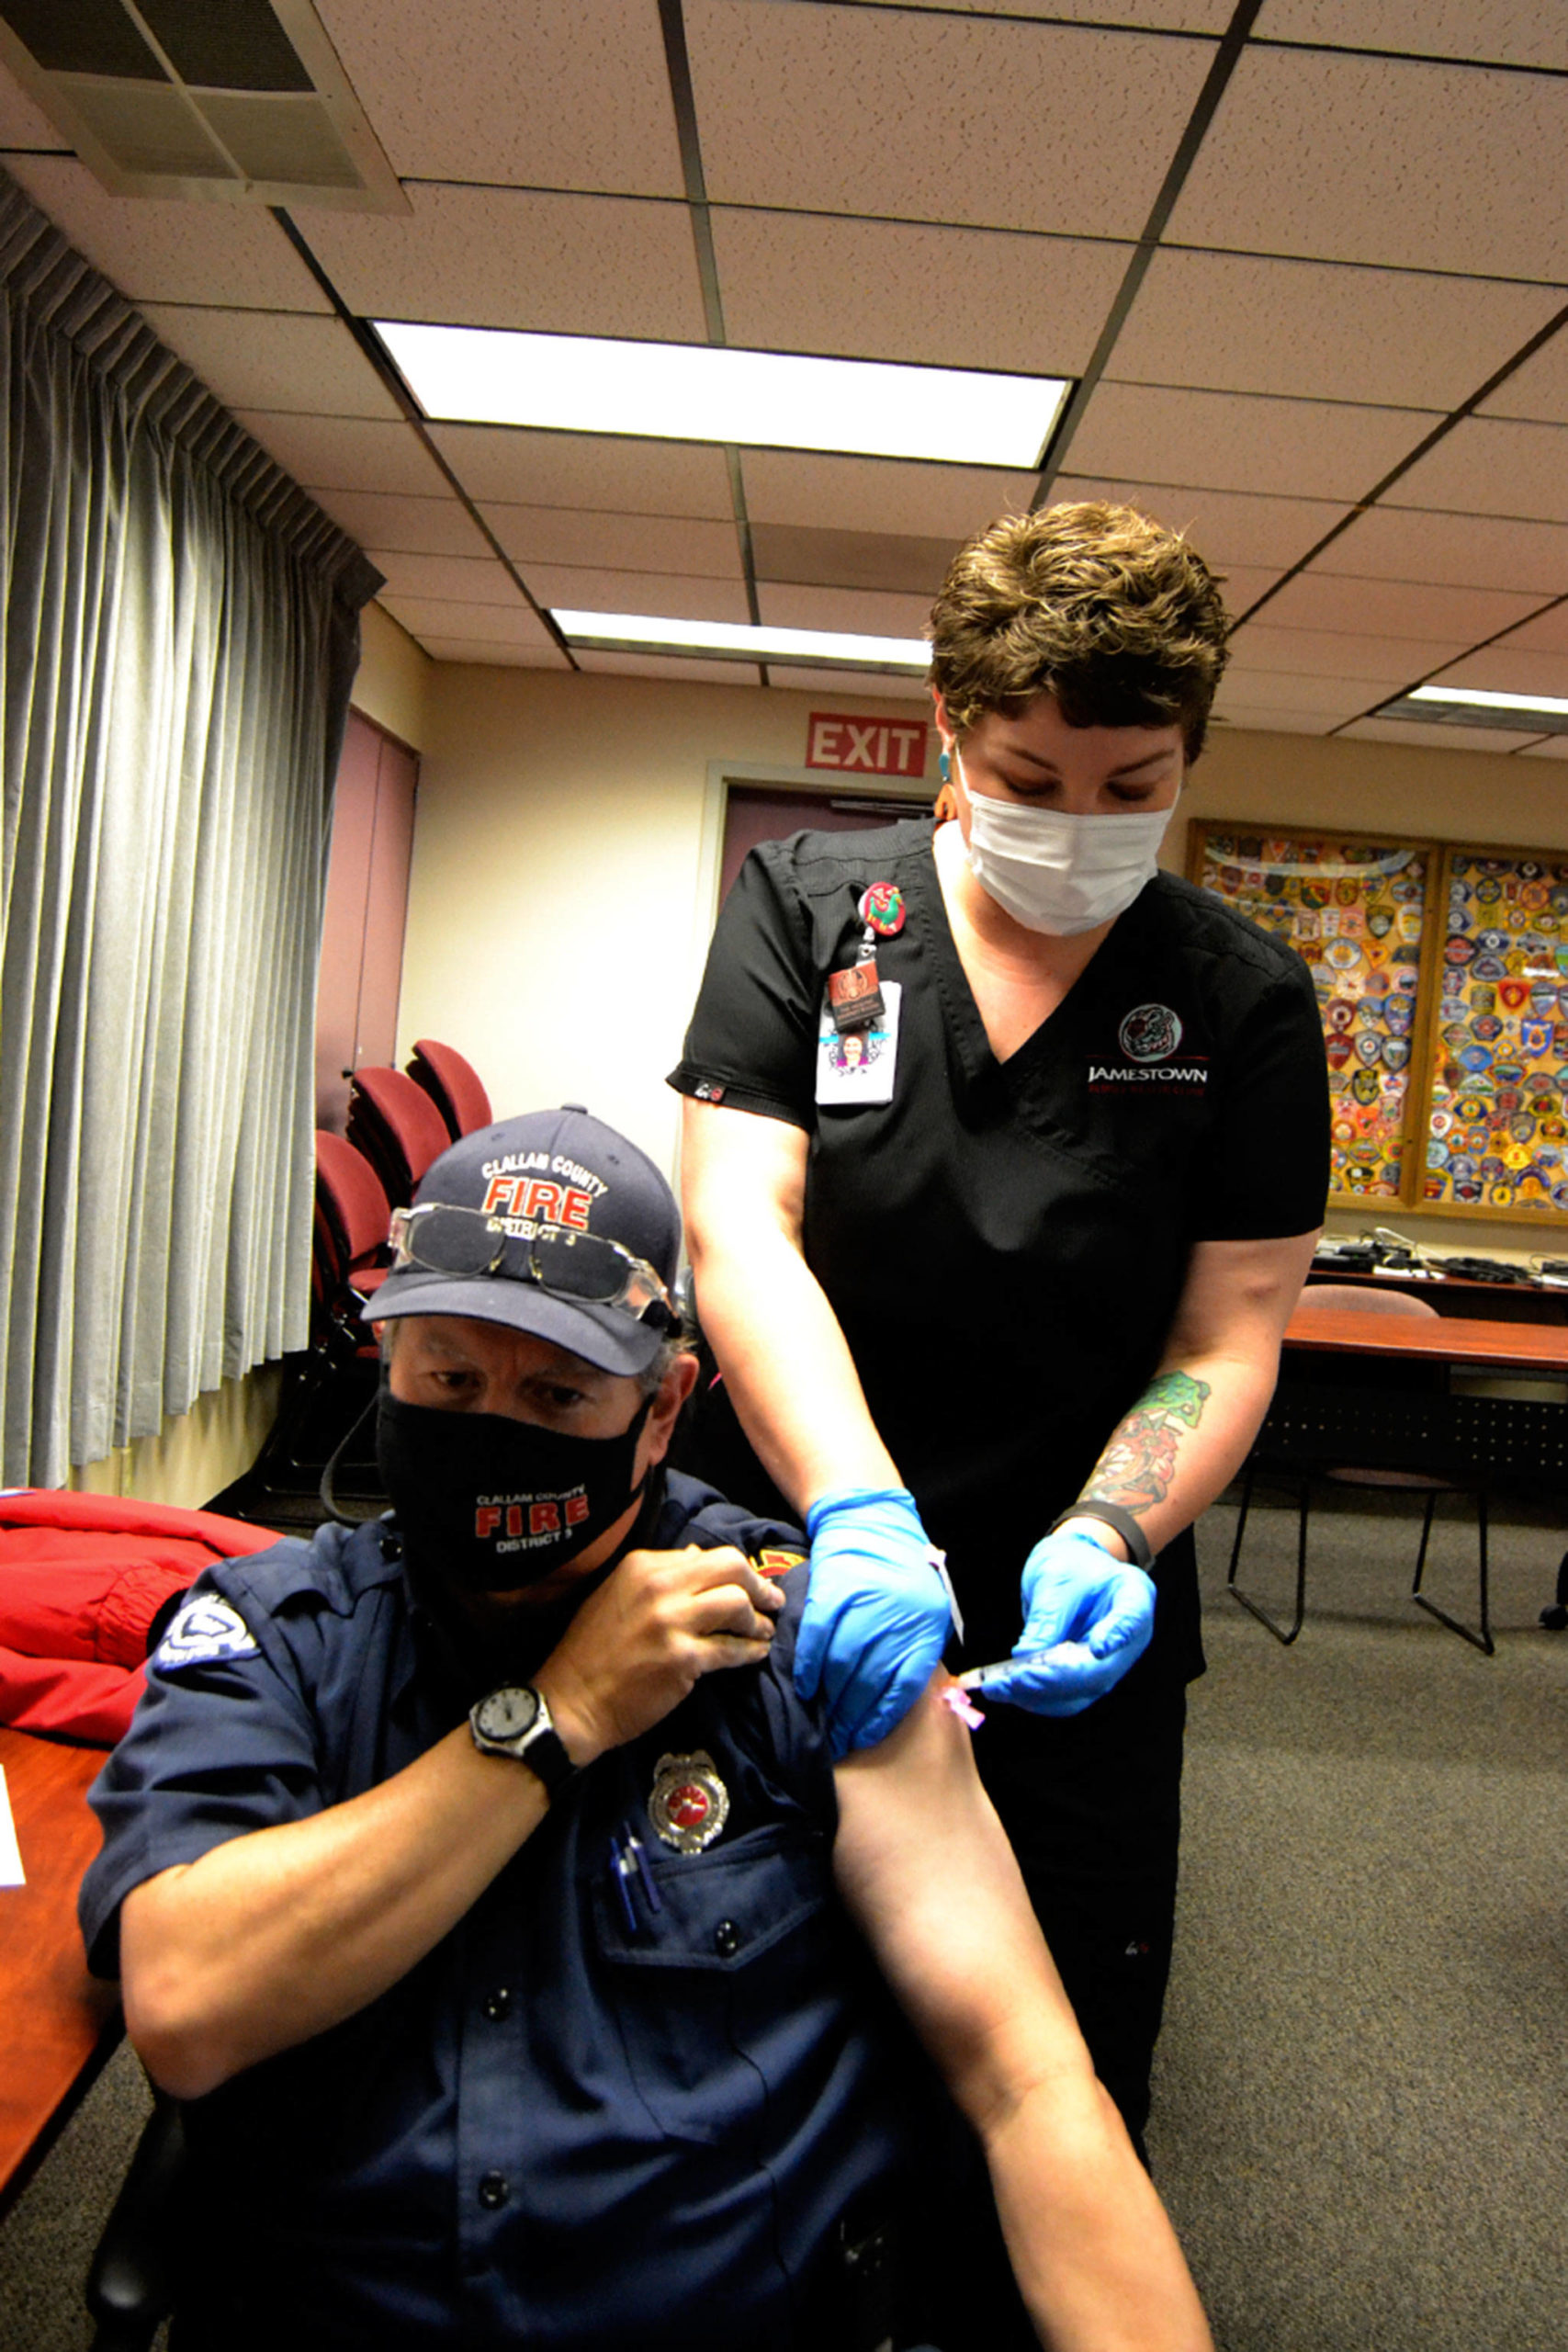 Blaine Zechenelly, a volunteer EMT and disaster planner with Clallam County Fire District 3, was the first Sequim-area first responder to receive a COVID-19 vaccine this week. Medical assistant Liz Moseley with Jamestown Family Health Clinic helped provide vaccinations Tuesday. (Matthew Nash/Olympic Peninsula News Group)